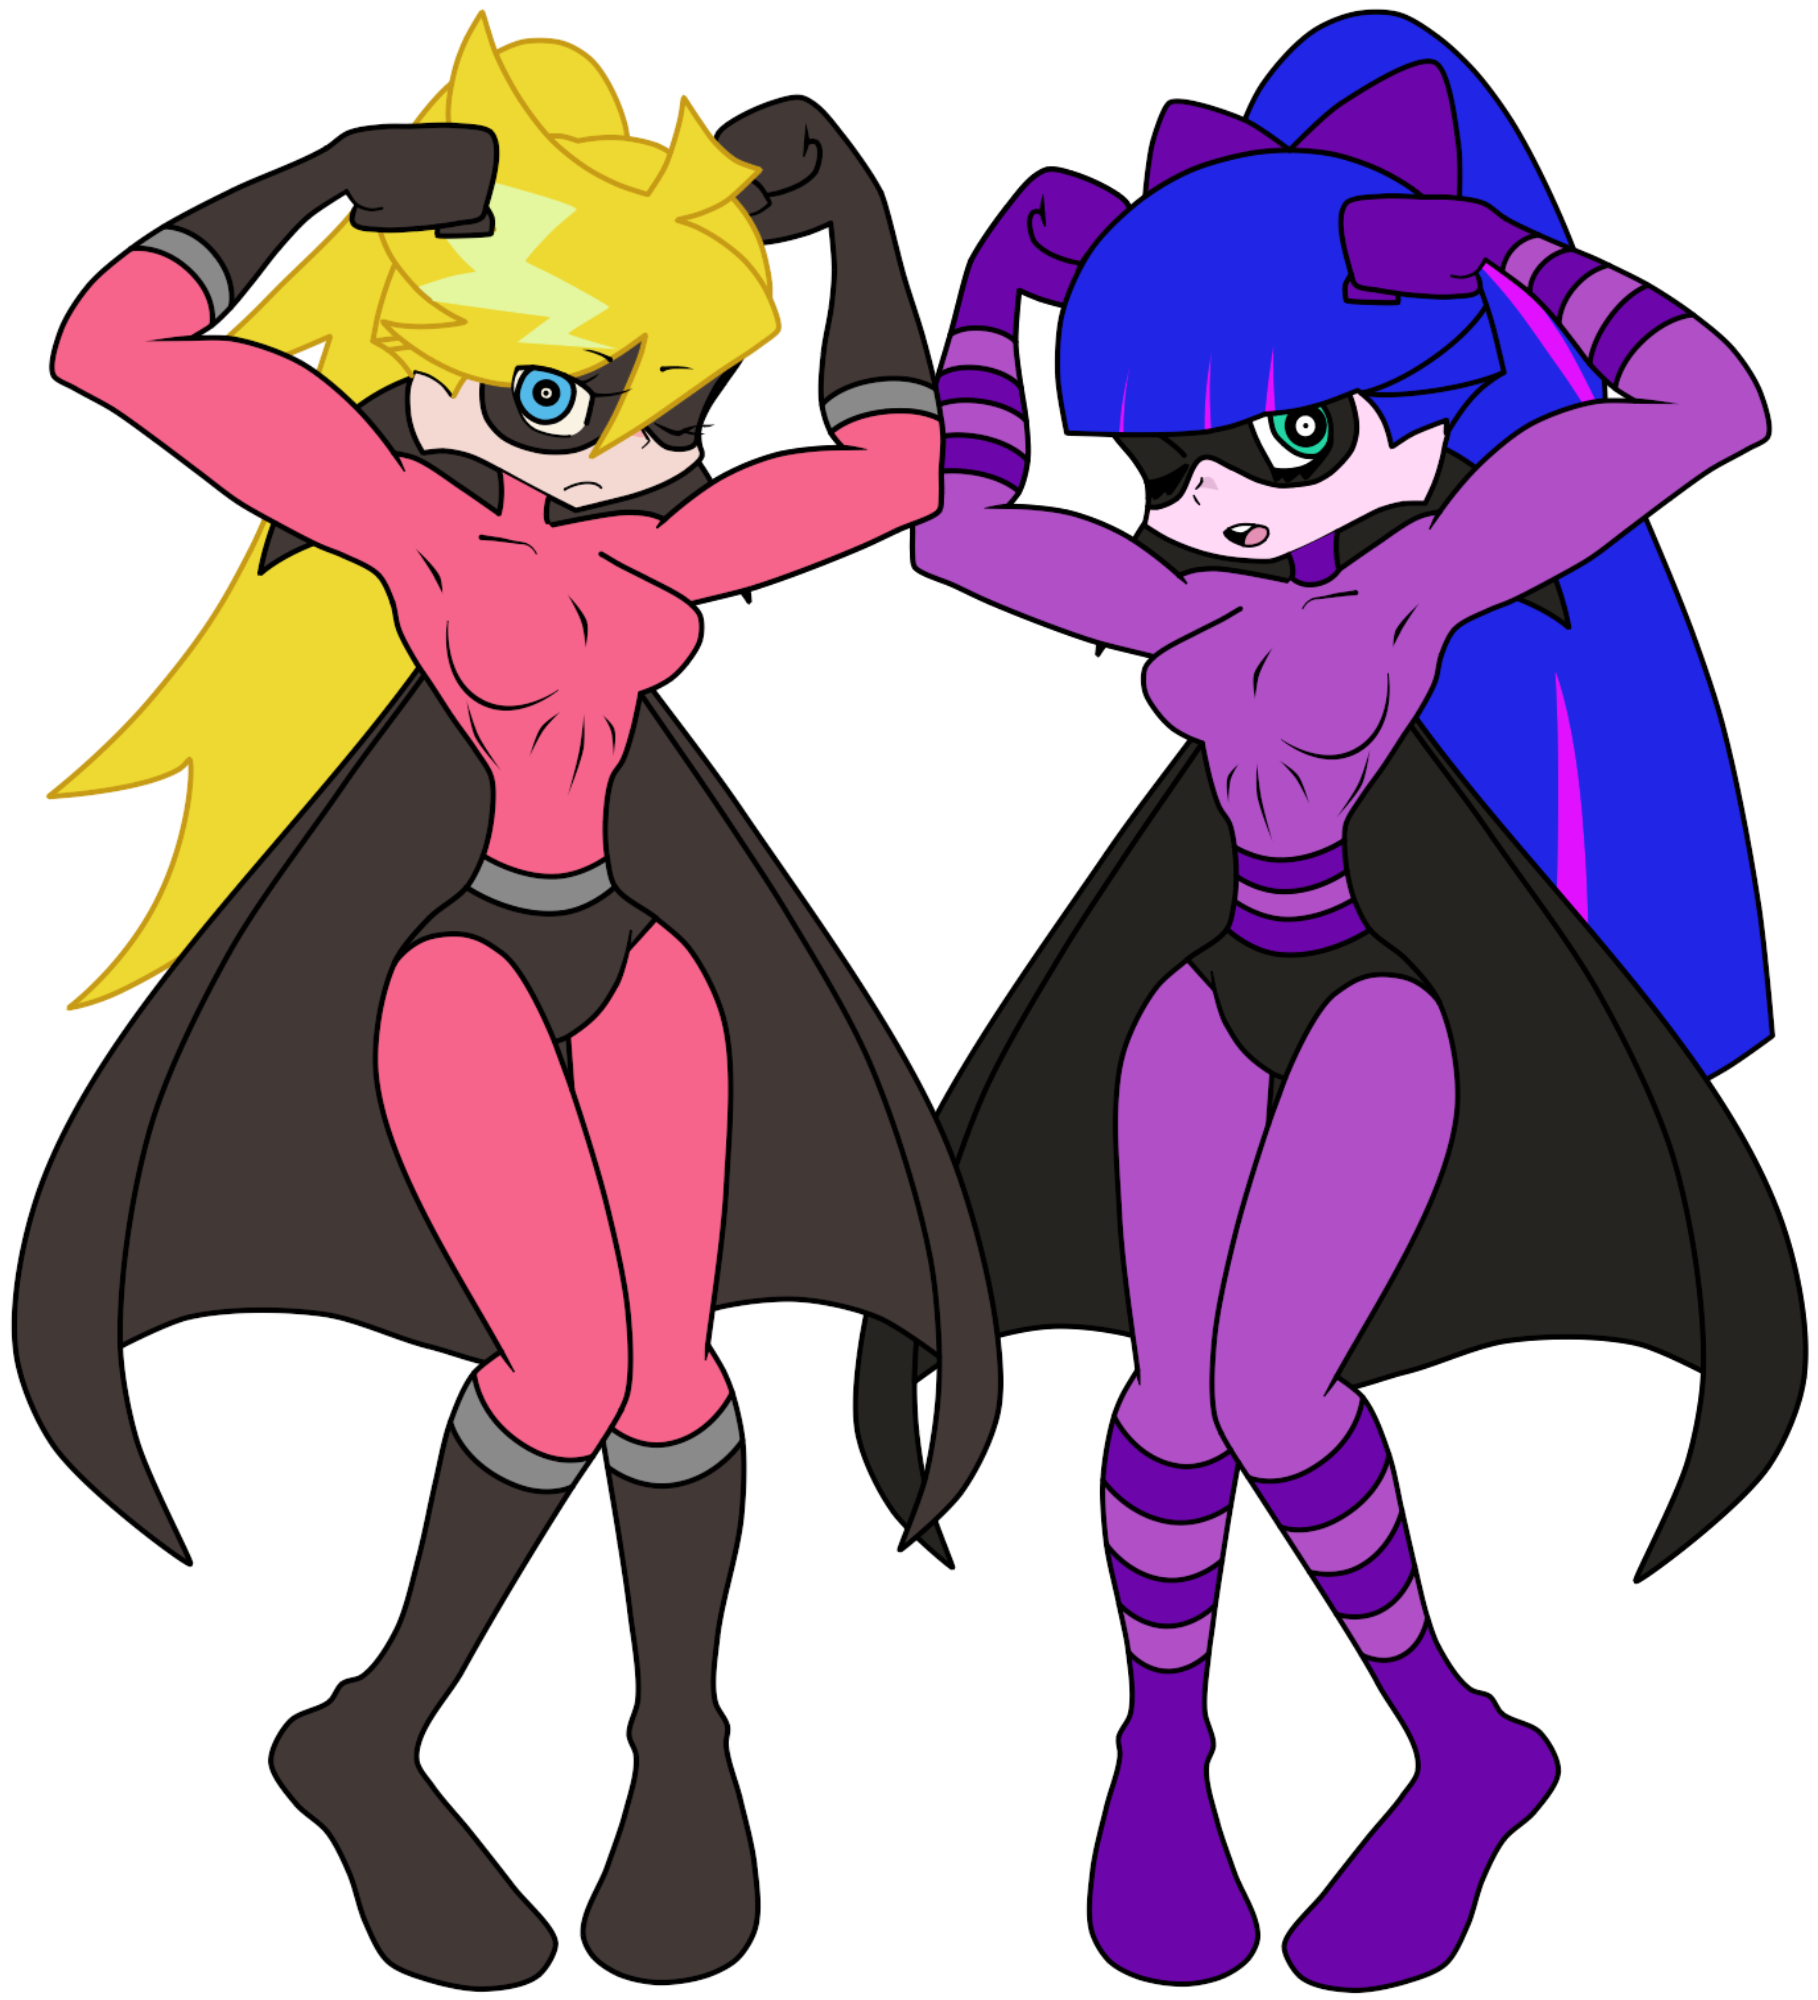 Panty, Stocking and Brief by Liplover6930 on DeviantArt